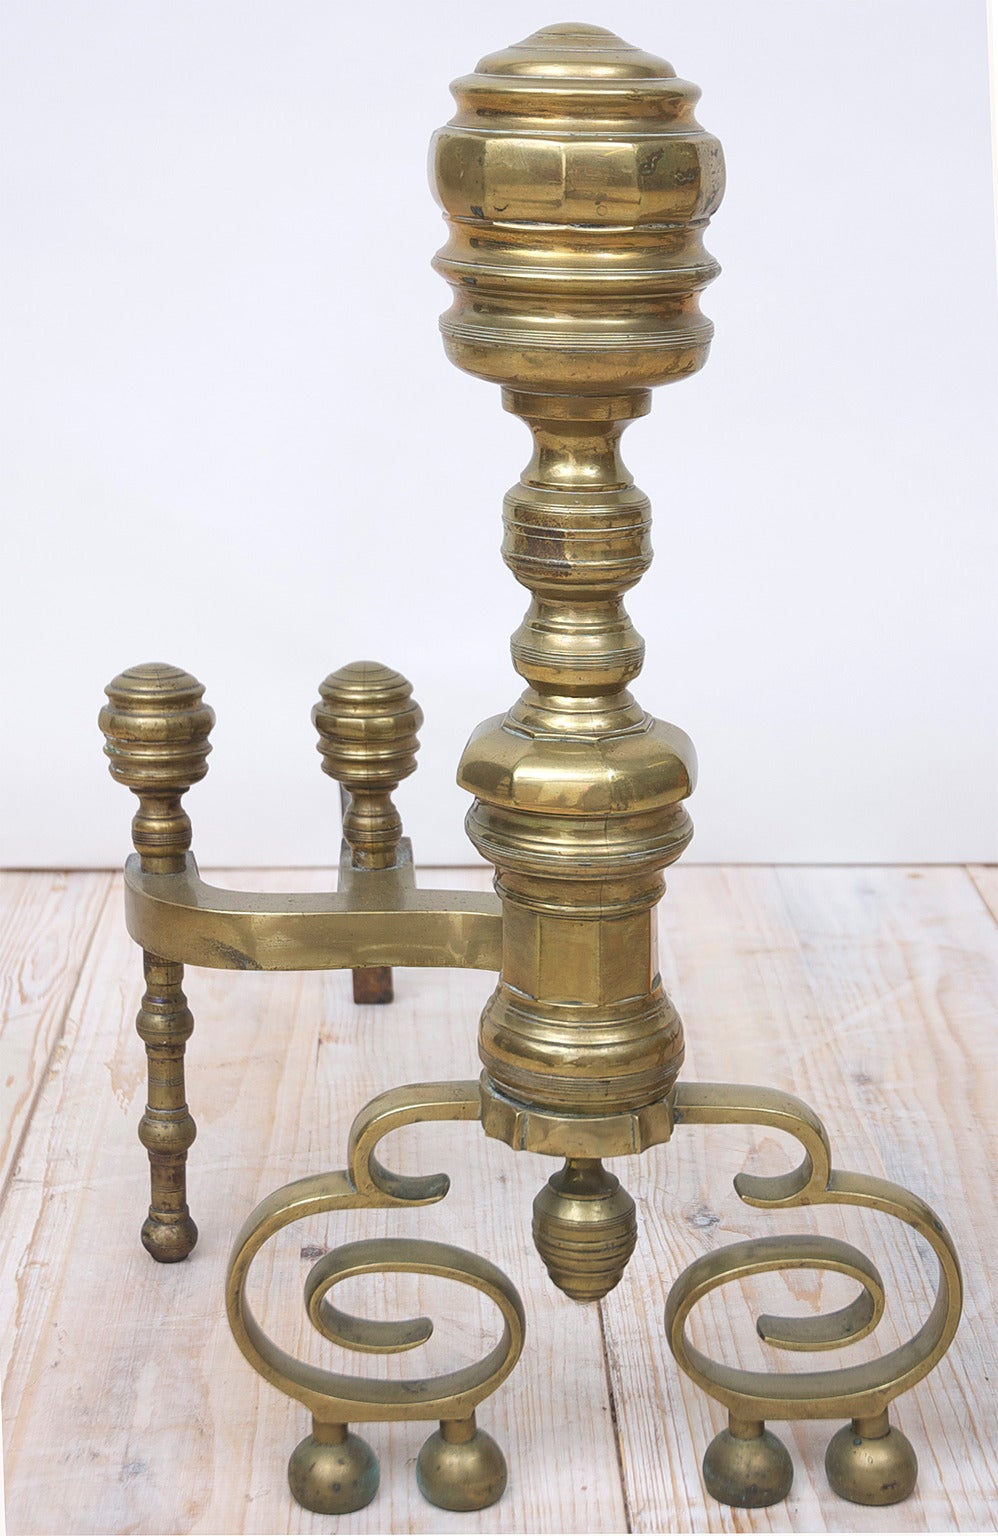 A very fine pair of Federal andirons in brass with wrought Iron, American, circa 1800s

11